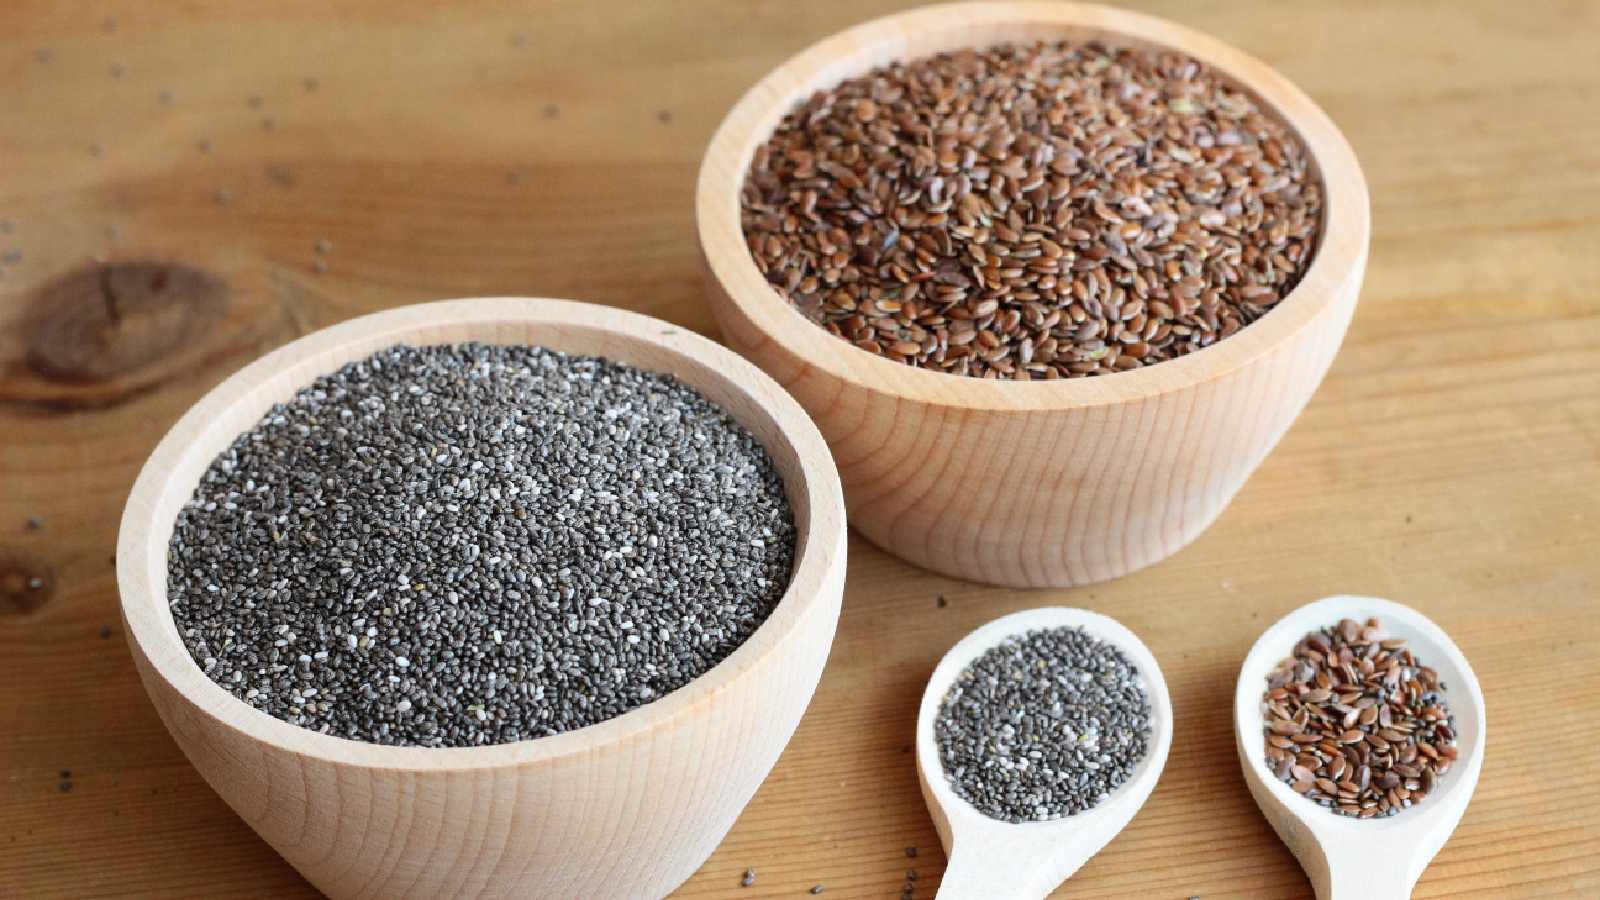 Flax seeds vs chia seeds: What's a better seed for weight loss?